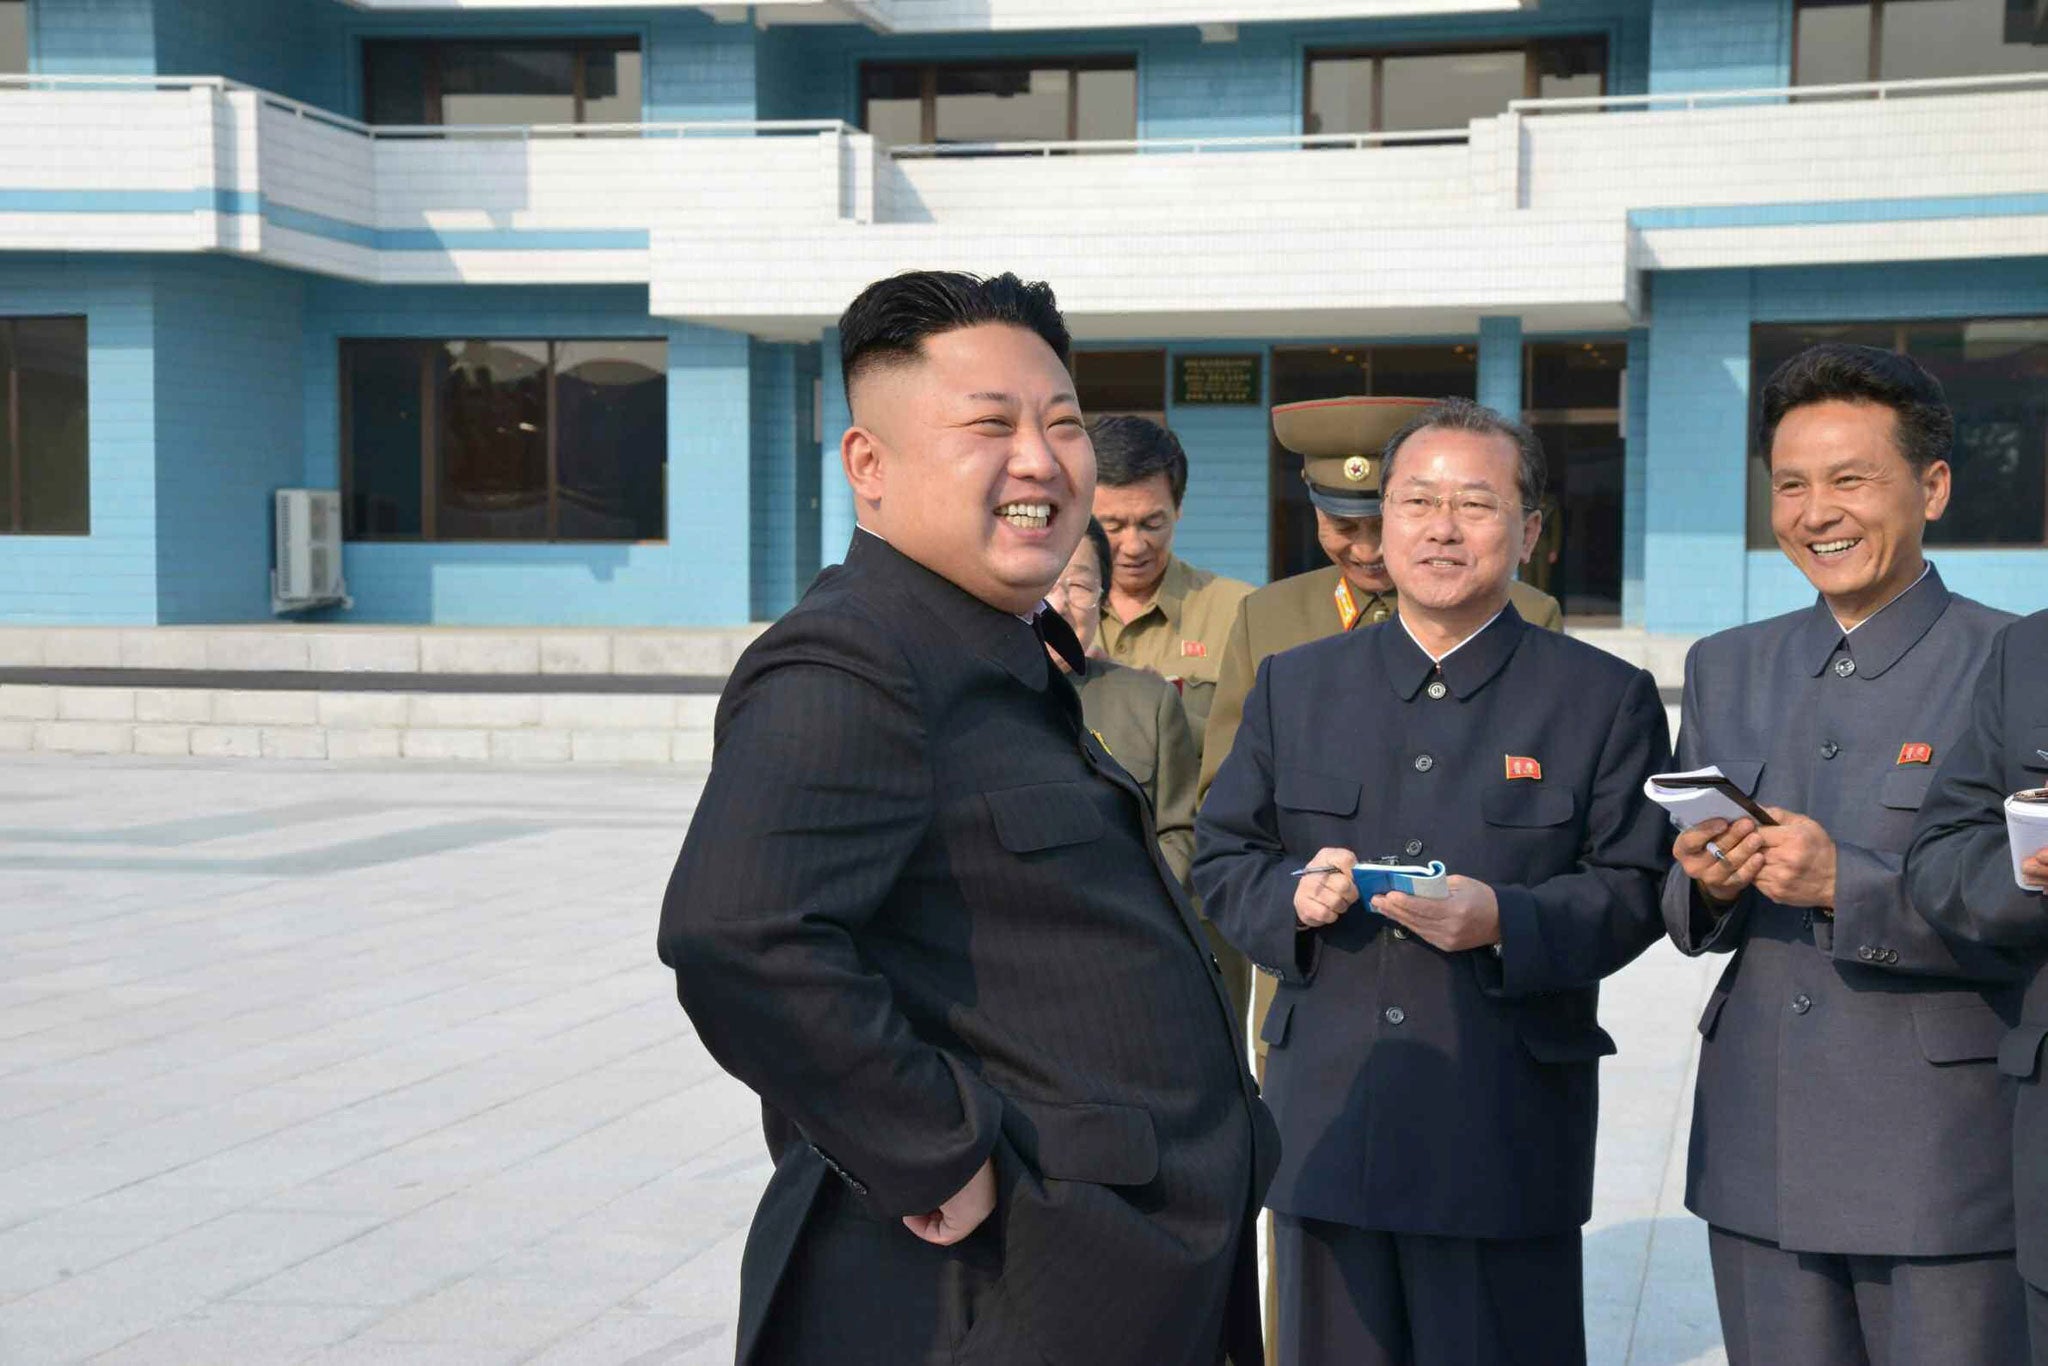 Kim Jong-un smiling broadly along with other officials during his visit to a youth camping site in Wonsan on the southeastern coast in North Korea